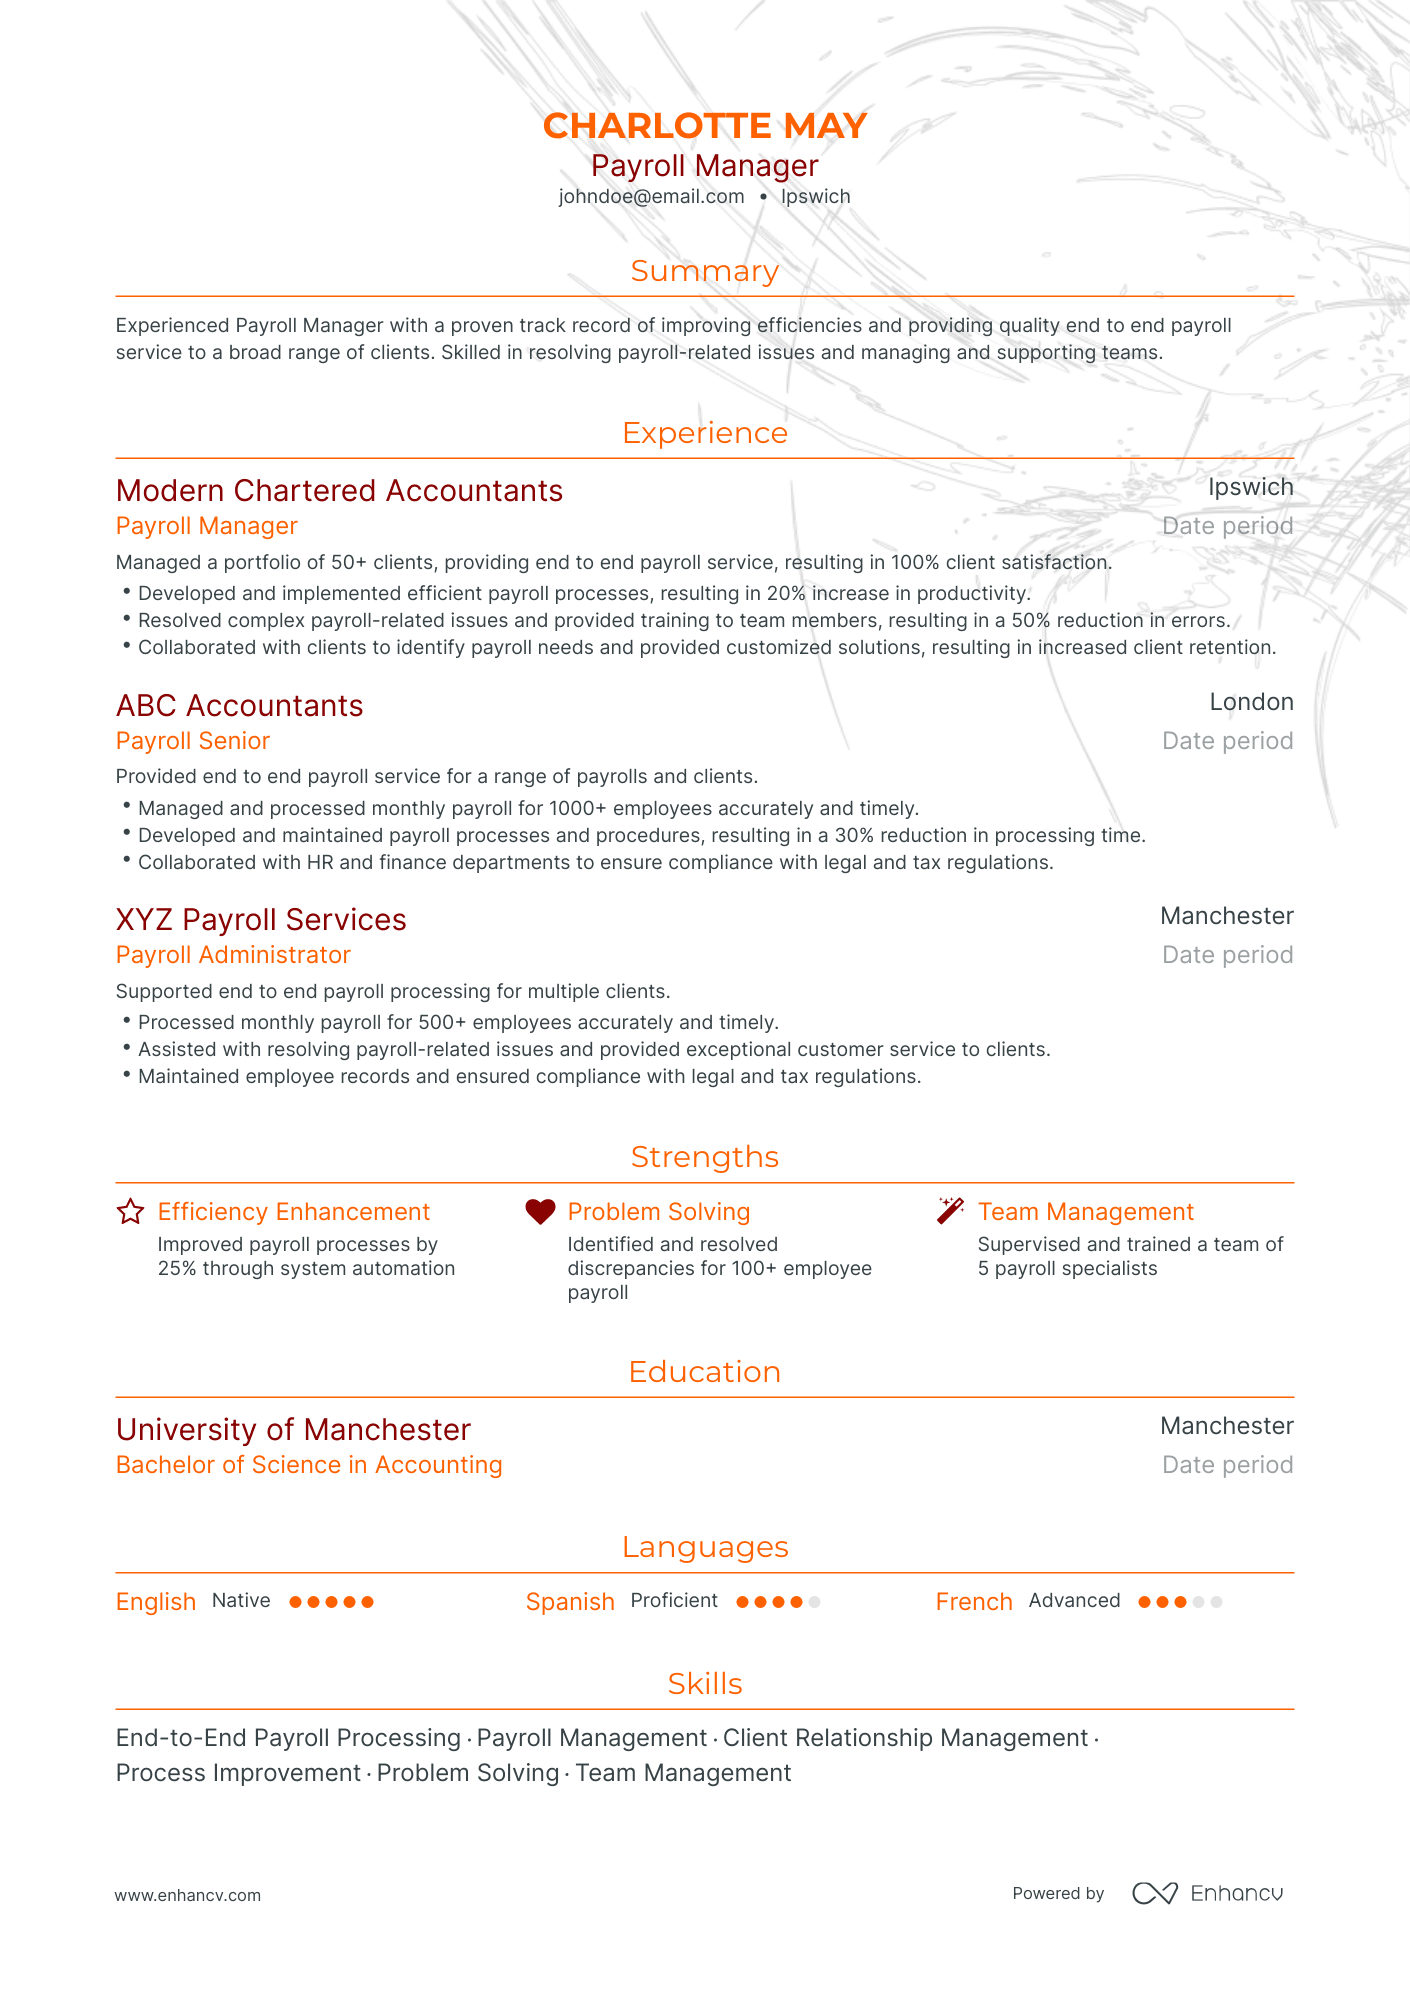 Traditional Payroll Manager Resume Template